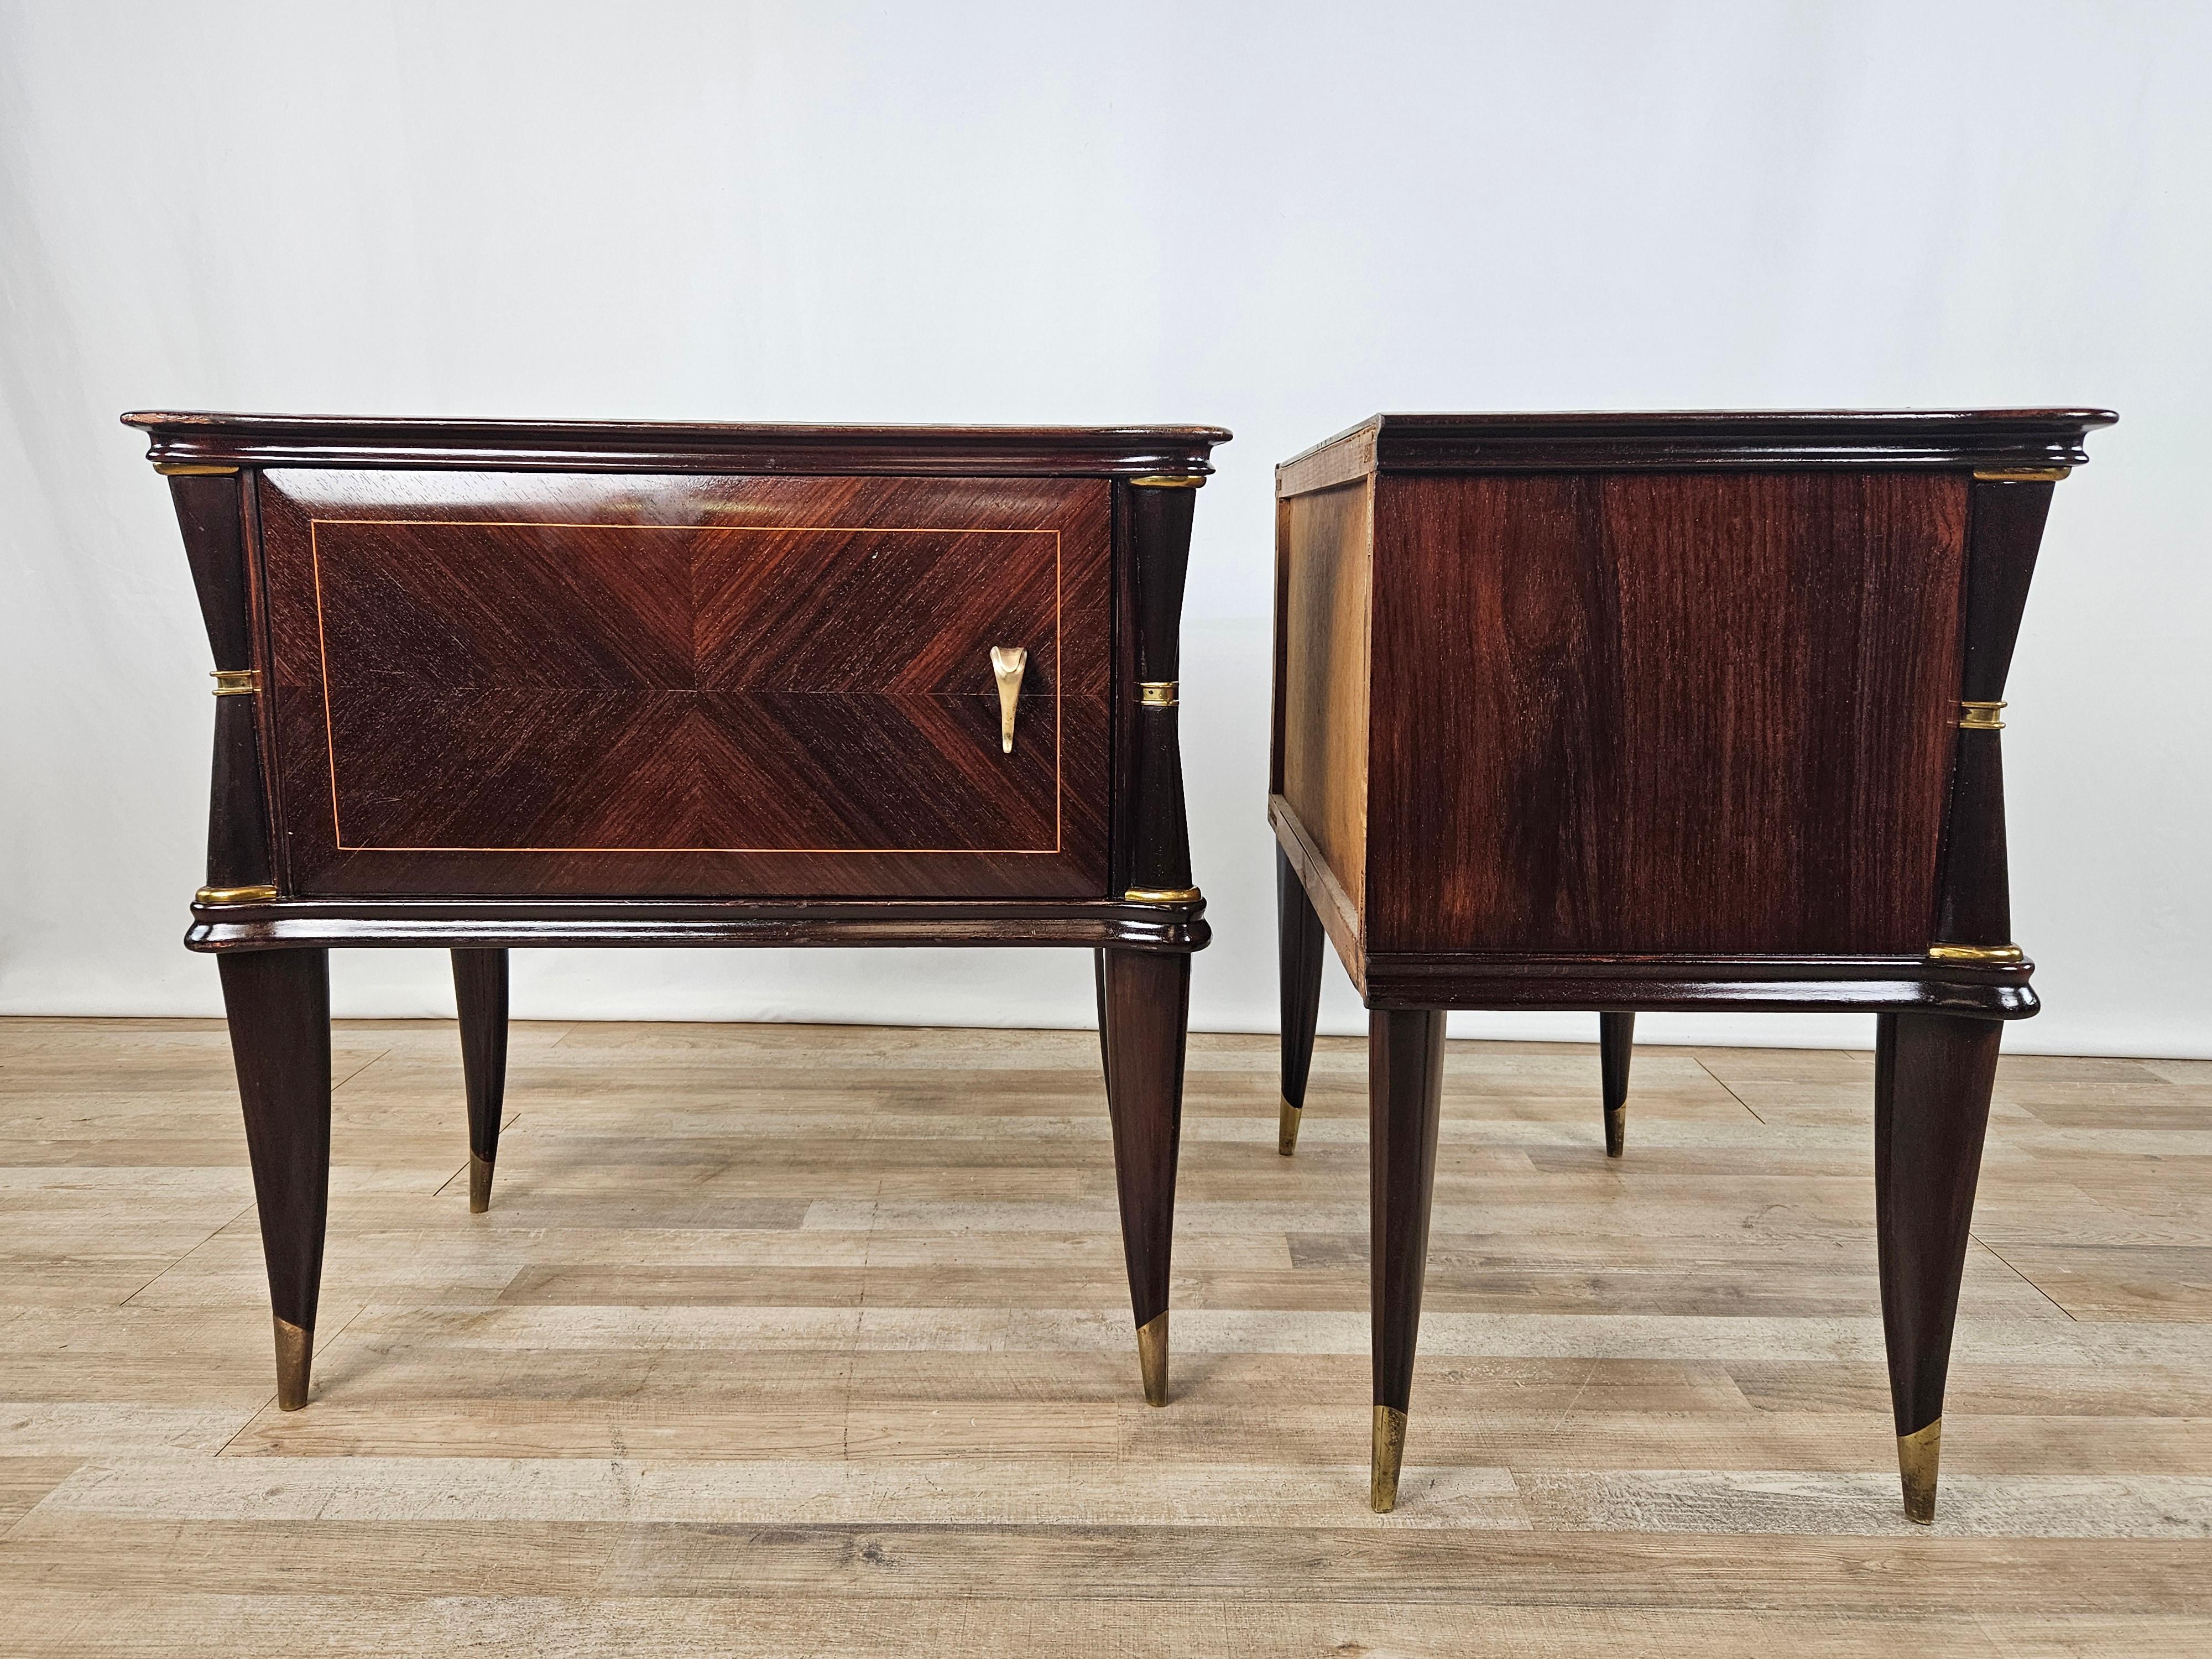 Elegant pair of bedside tables with special brass details and rosewood profiles, decorated glass top.

The frame is mahogany burl with maple threading along the doors and rosewood edges and legs.

They have been oil polished, show normal signs due